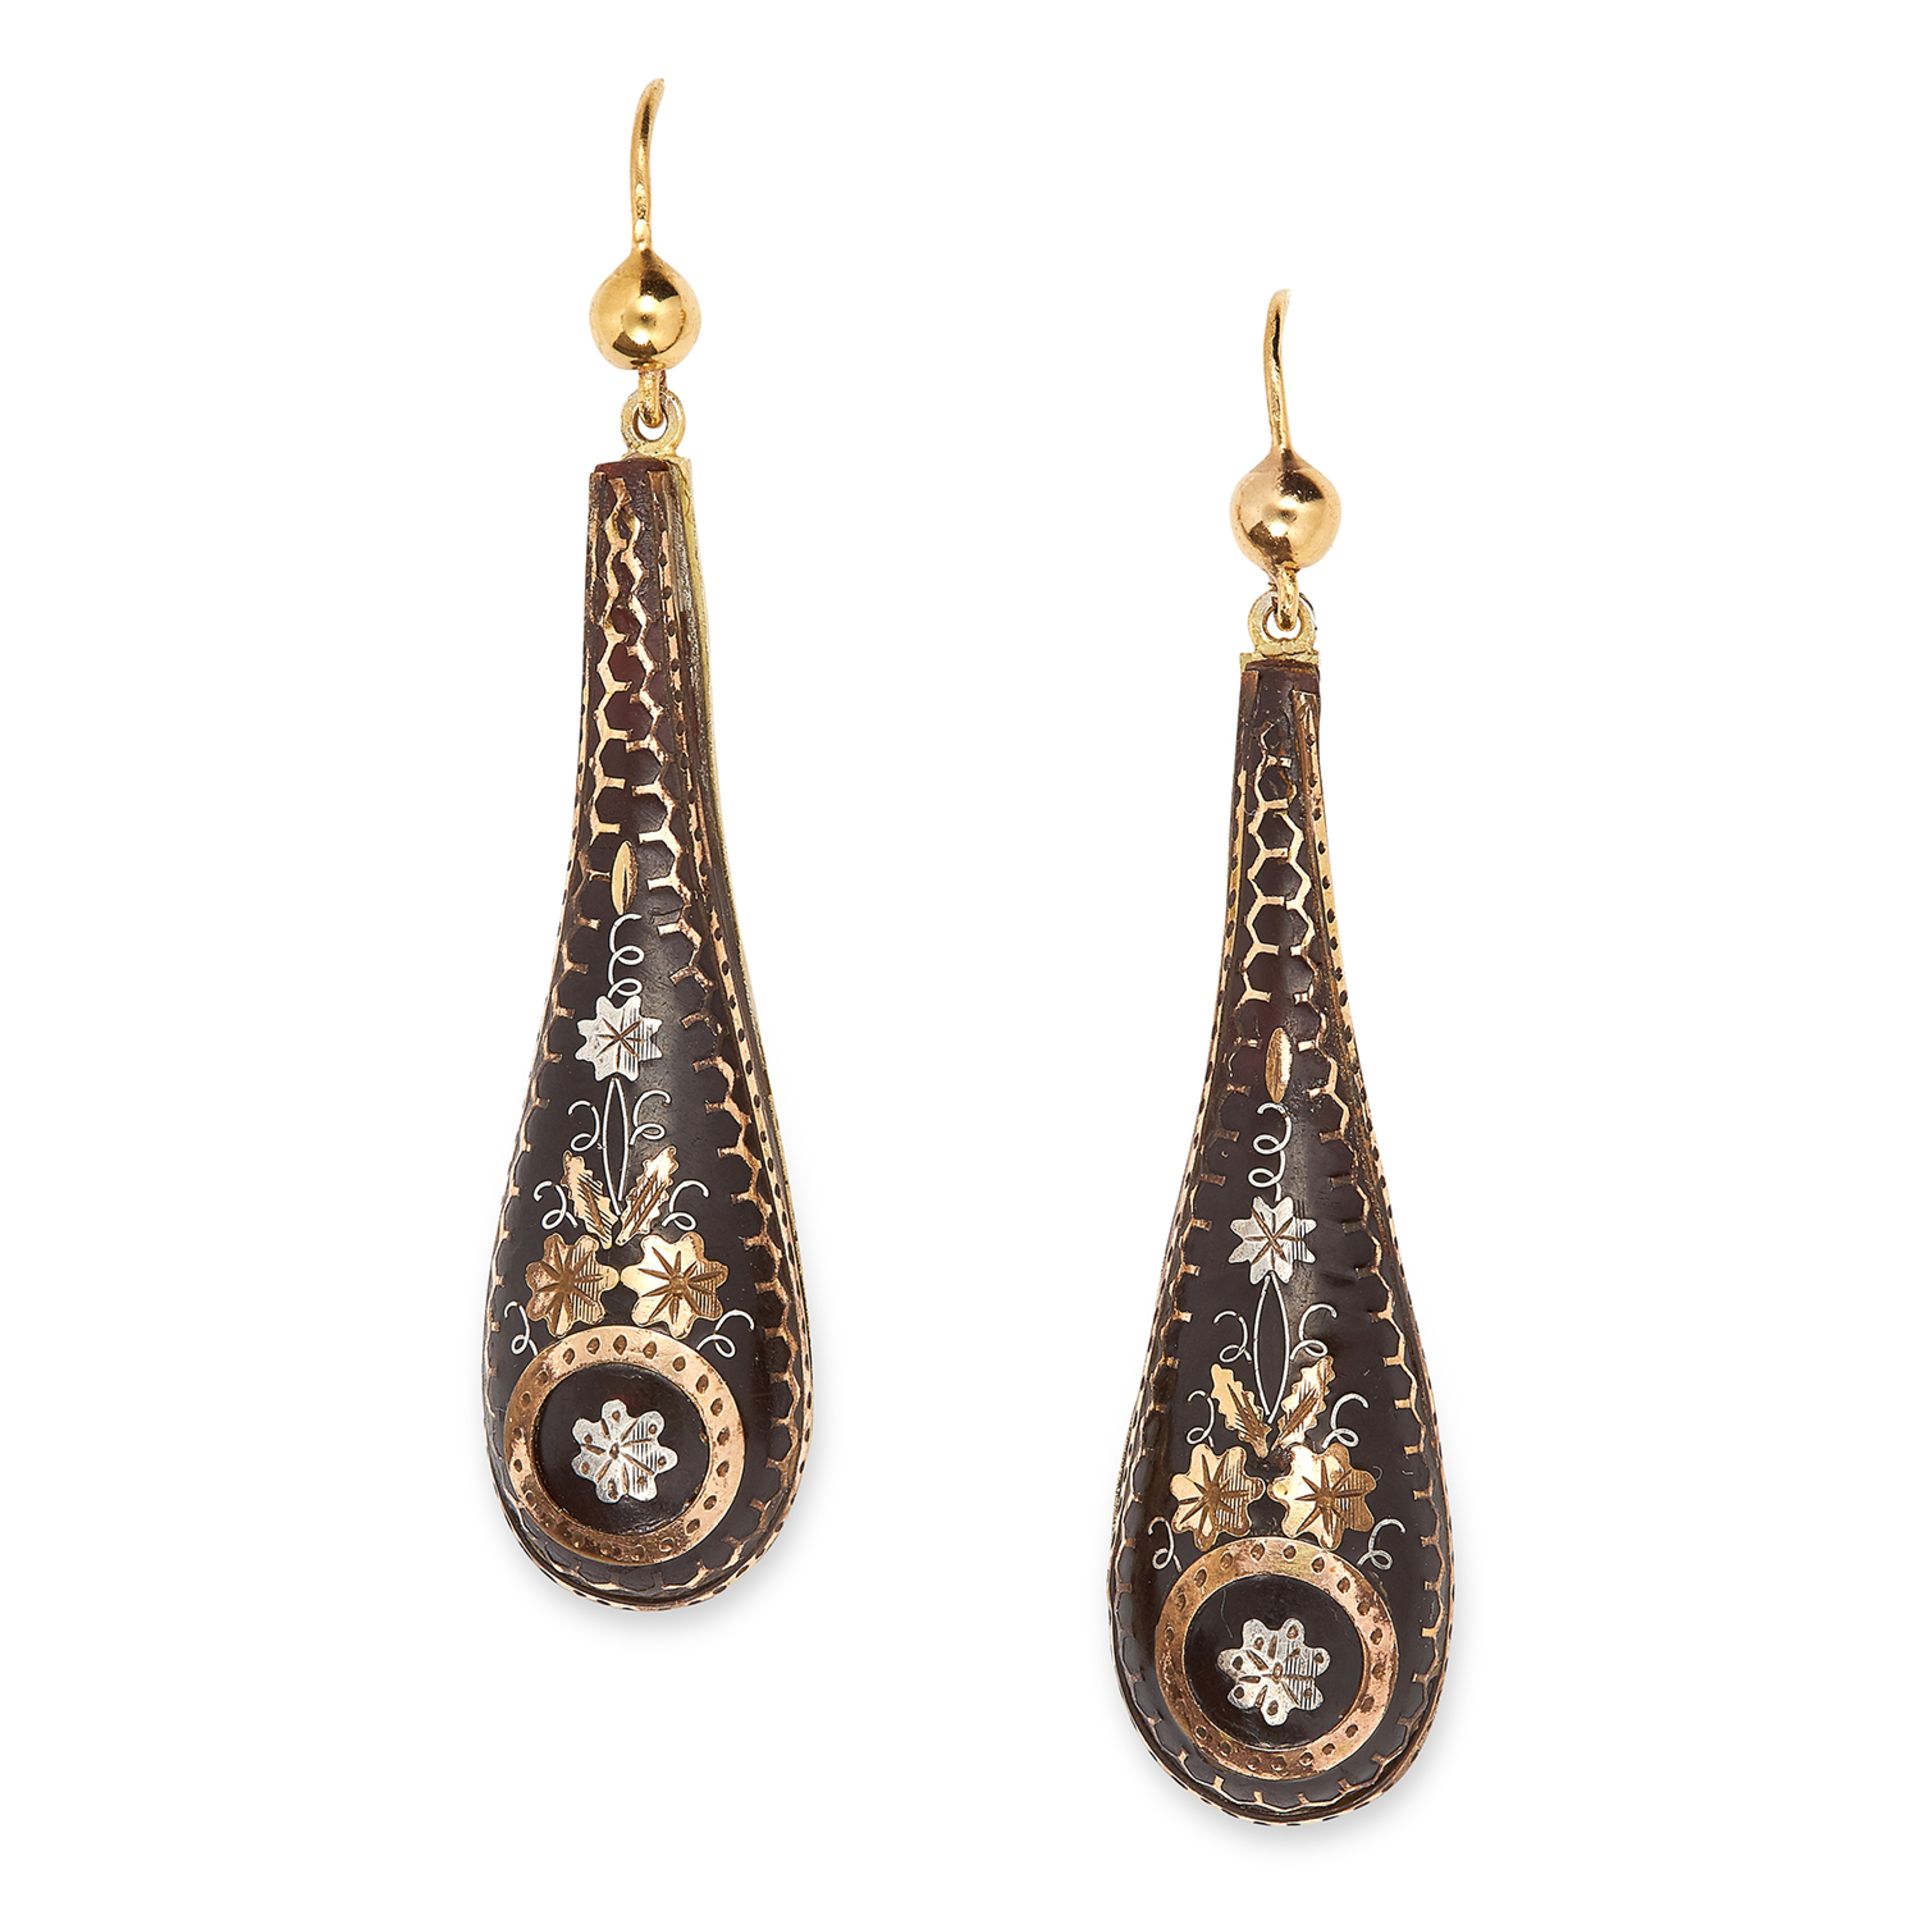 ANTIQUE TORTOISESHELL PIQUE EARRINGS, 19TH CENTURY the drop shaped bodies inlaid with gold pique